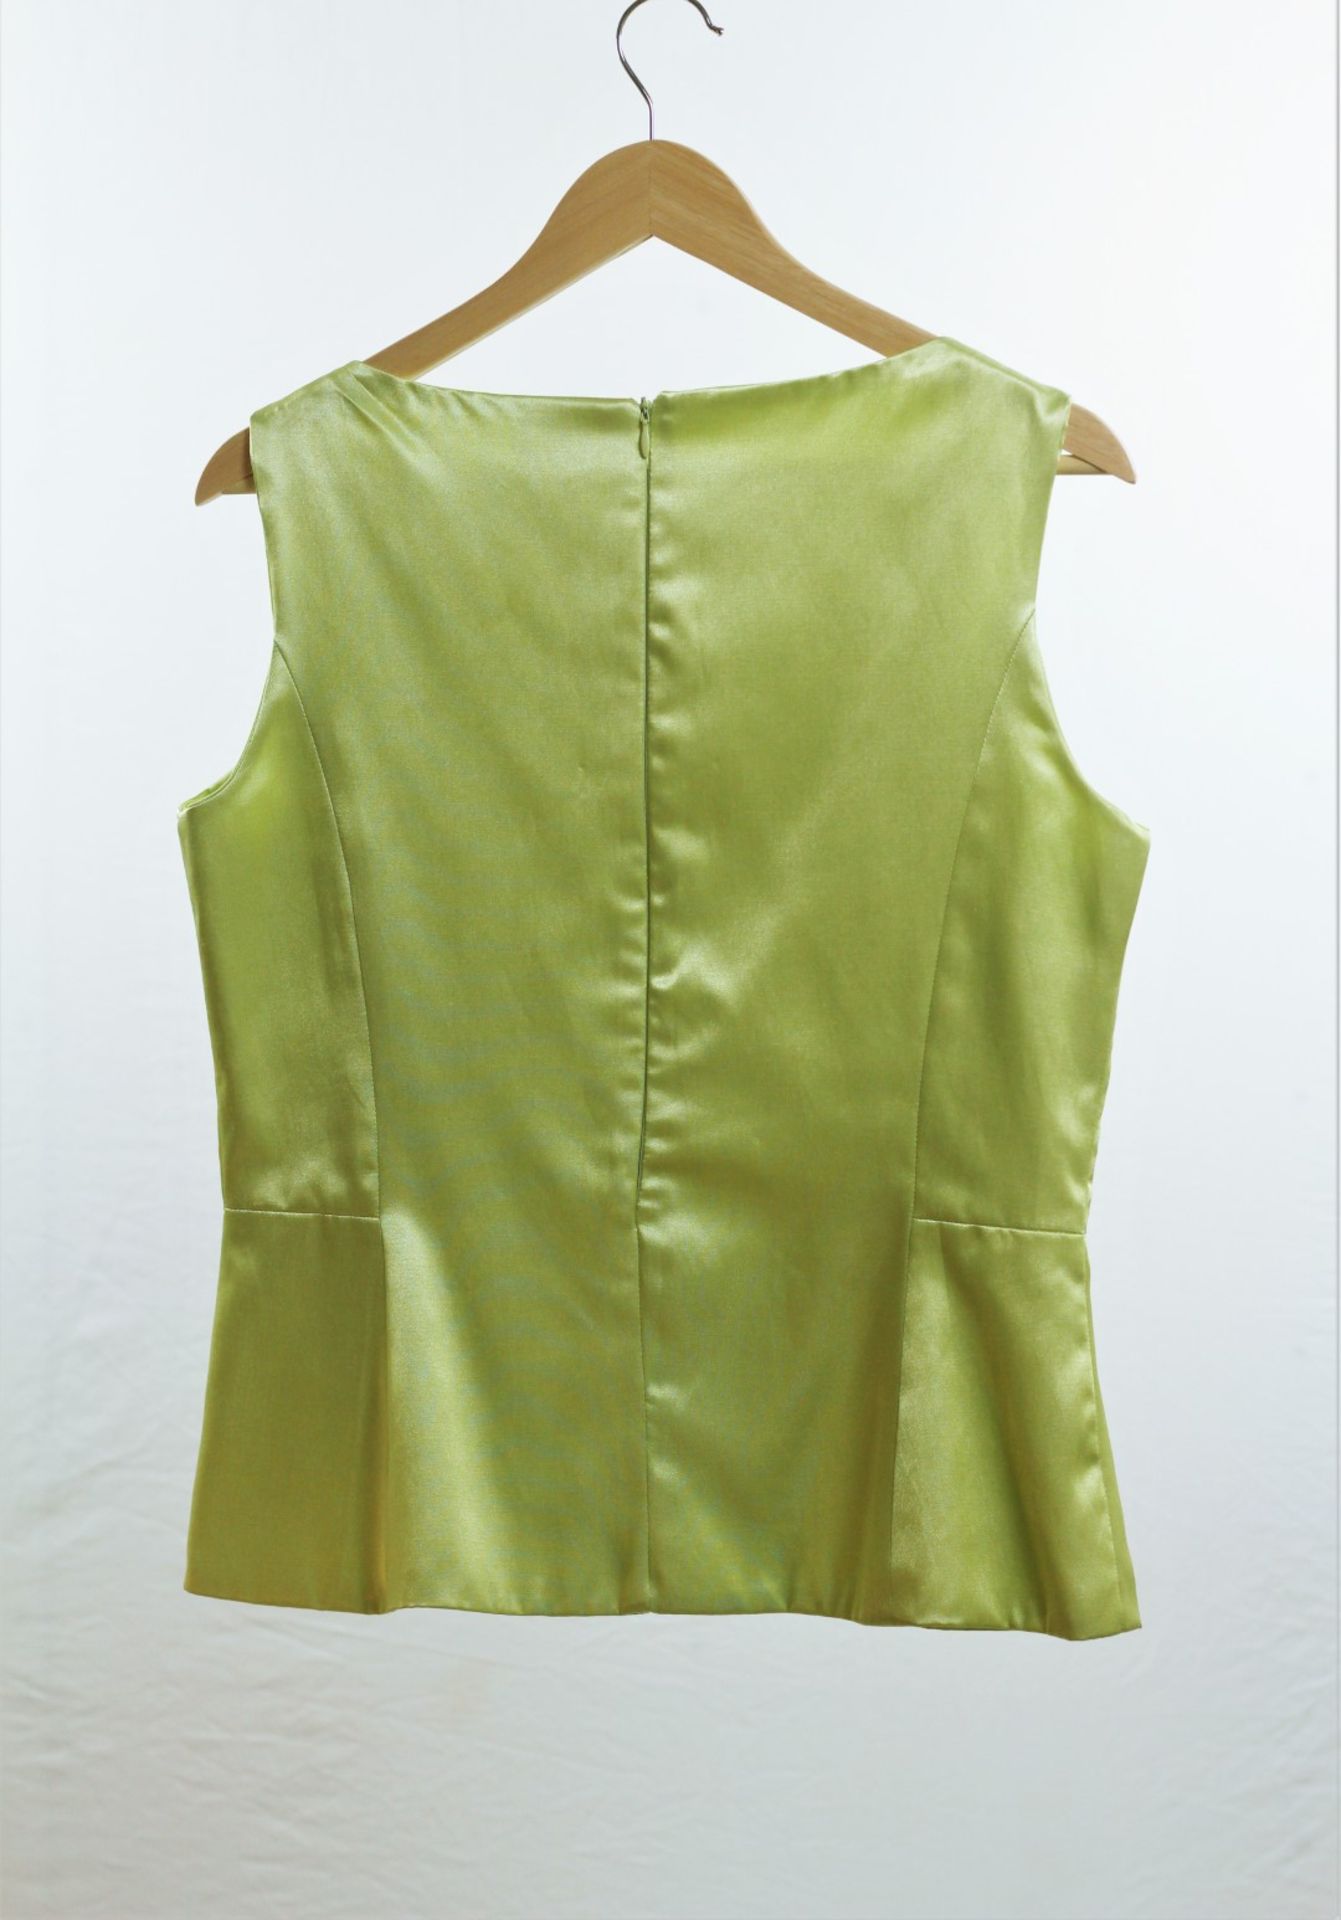 1 x Boutique Le Duc Lime Green Vest - From a High End Clothing Boutique In The - Image 9 of 9